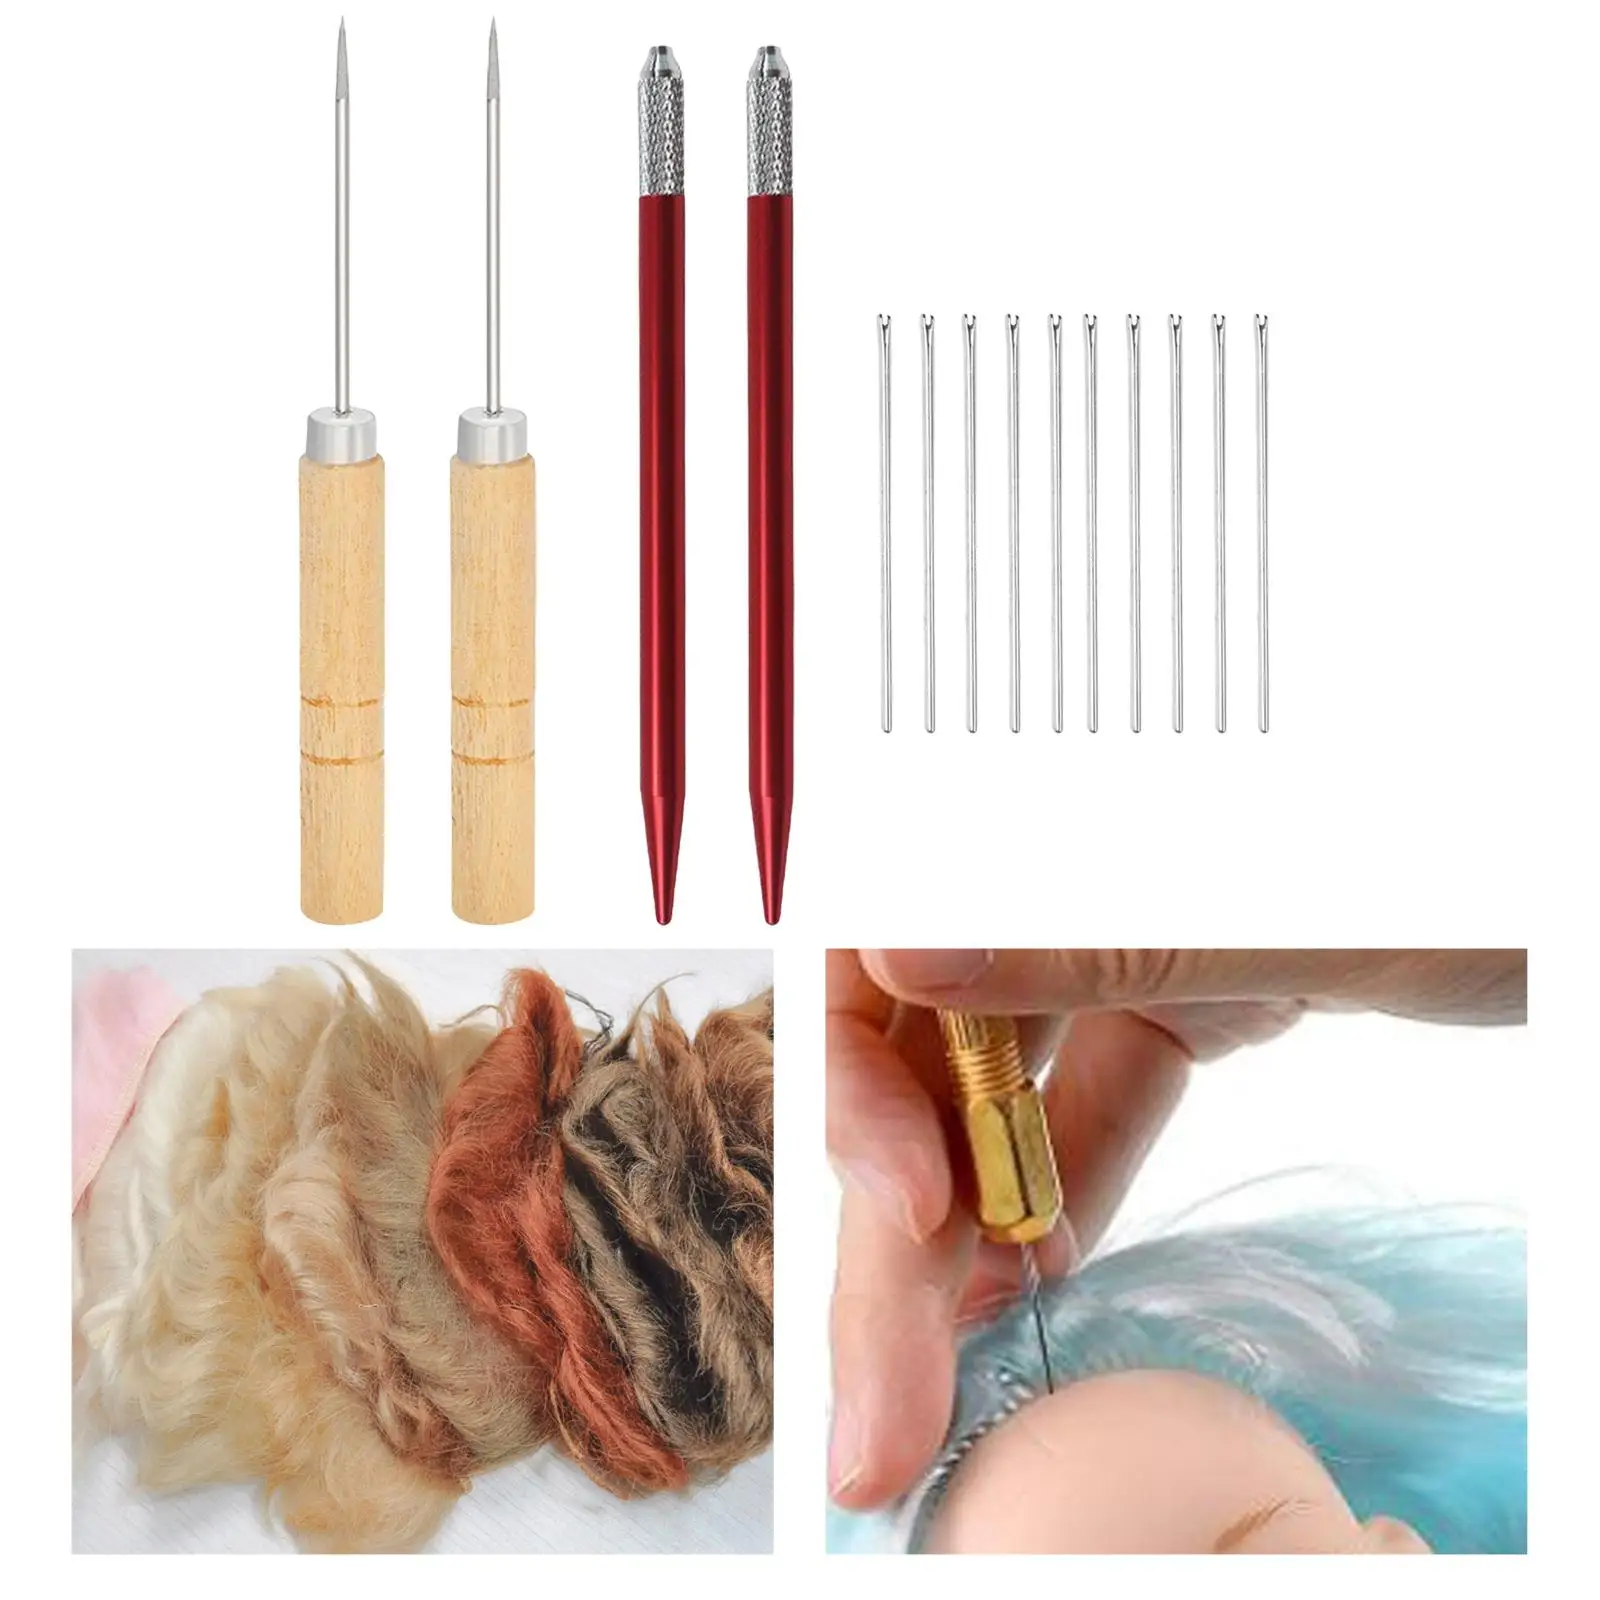 Doll Hair Rooting Tools, Doll Making Supplies, Needles, Doll Hair Rooting DIY Making Kit, Spare Parts, 1 Set, Easy to Use